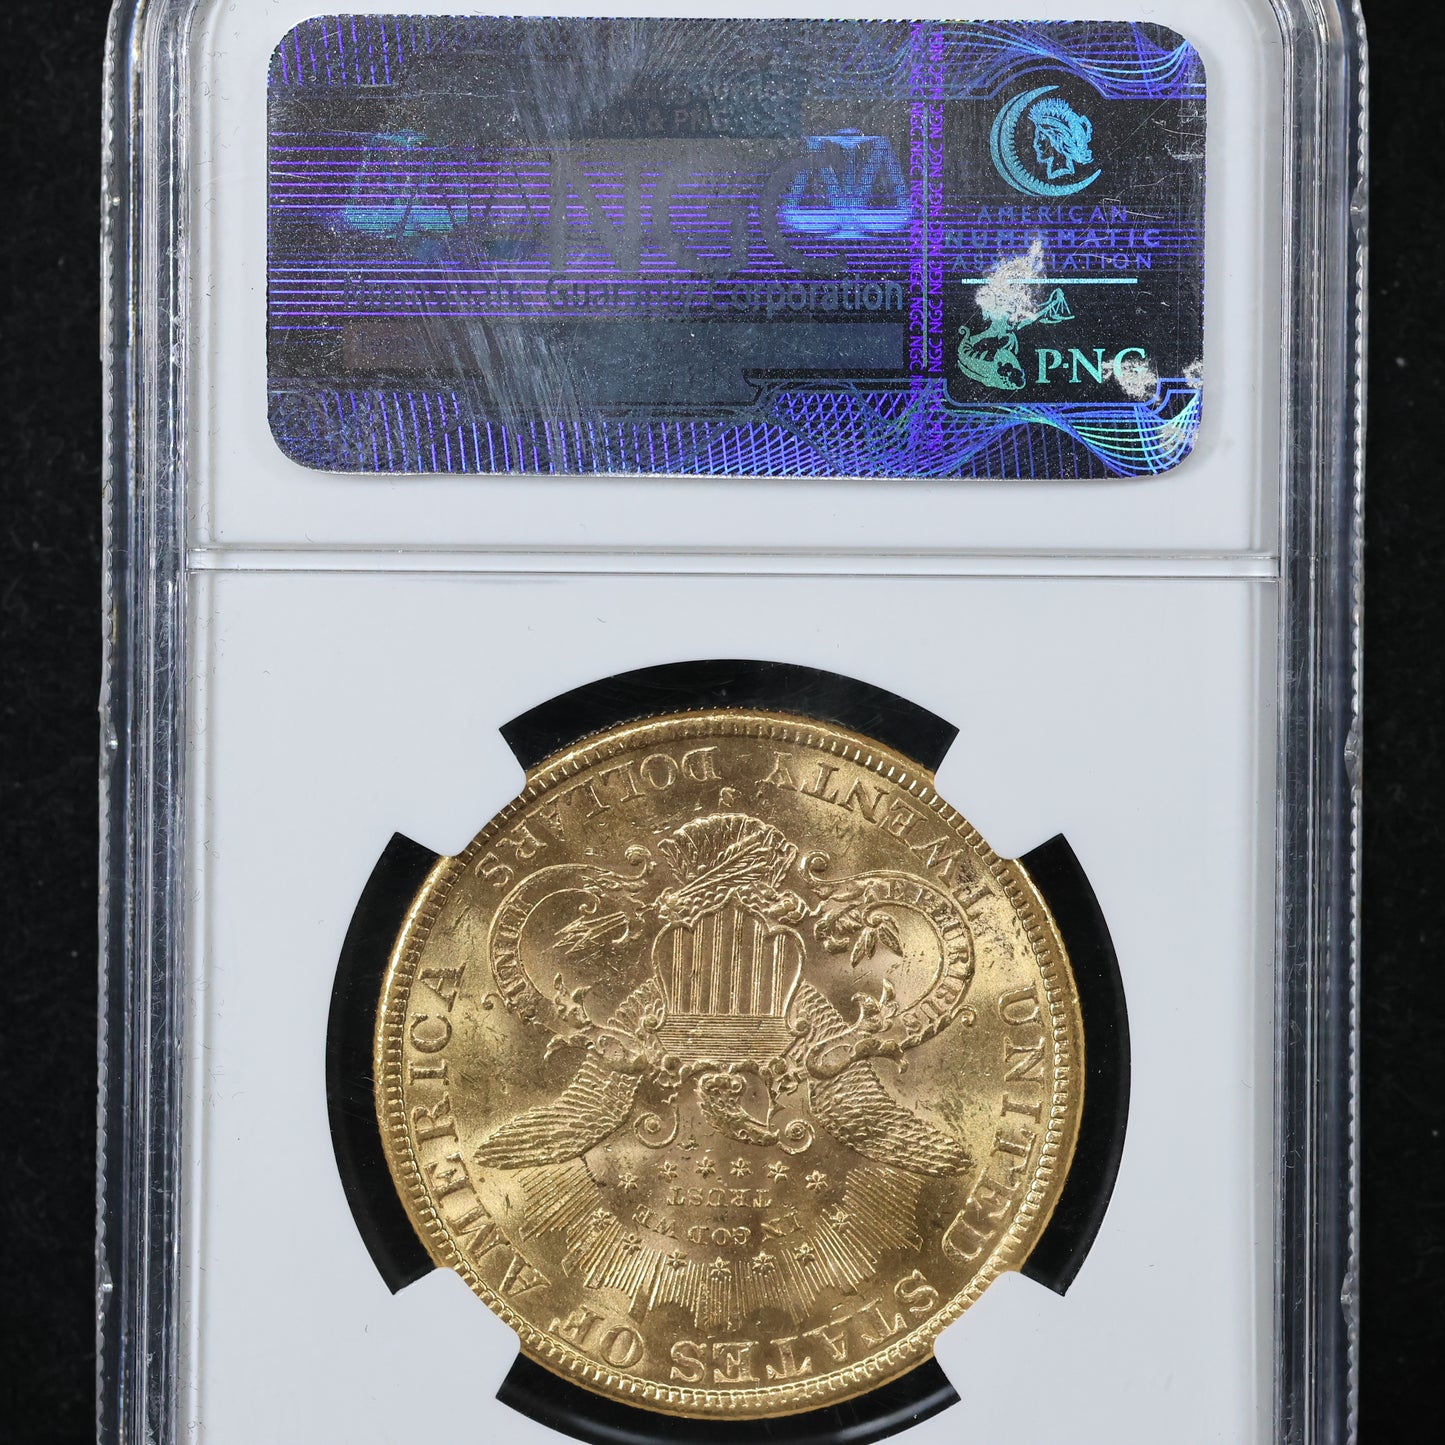 1899 S (San Francisco) $20 Liberty Head US Gold Double Eagle Coin - NGC MS 62